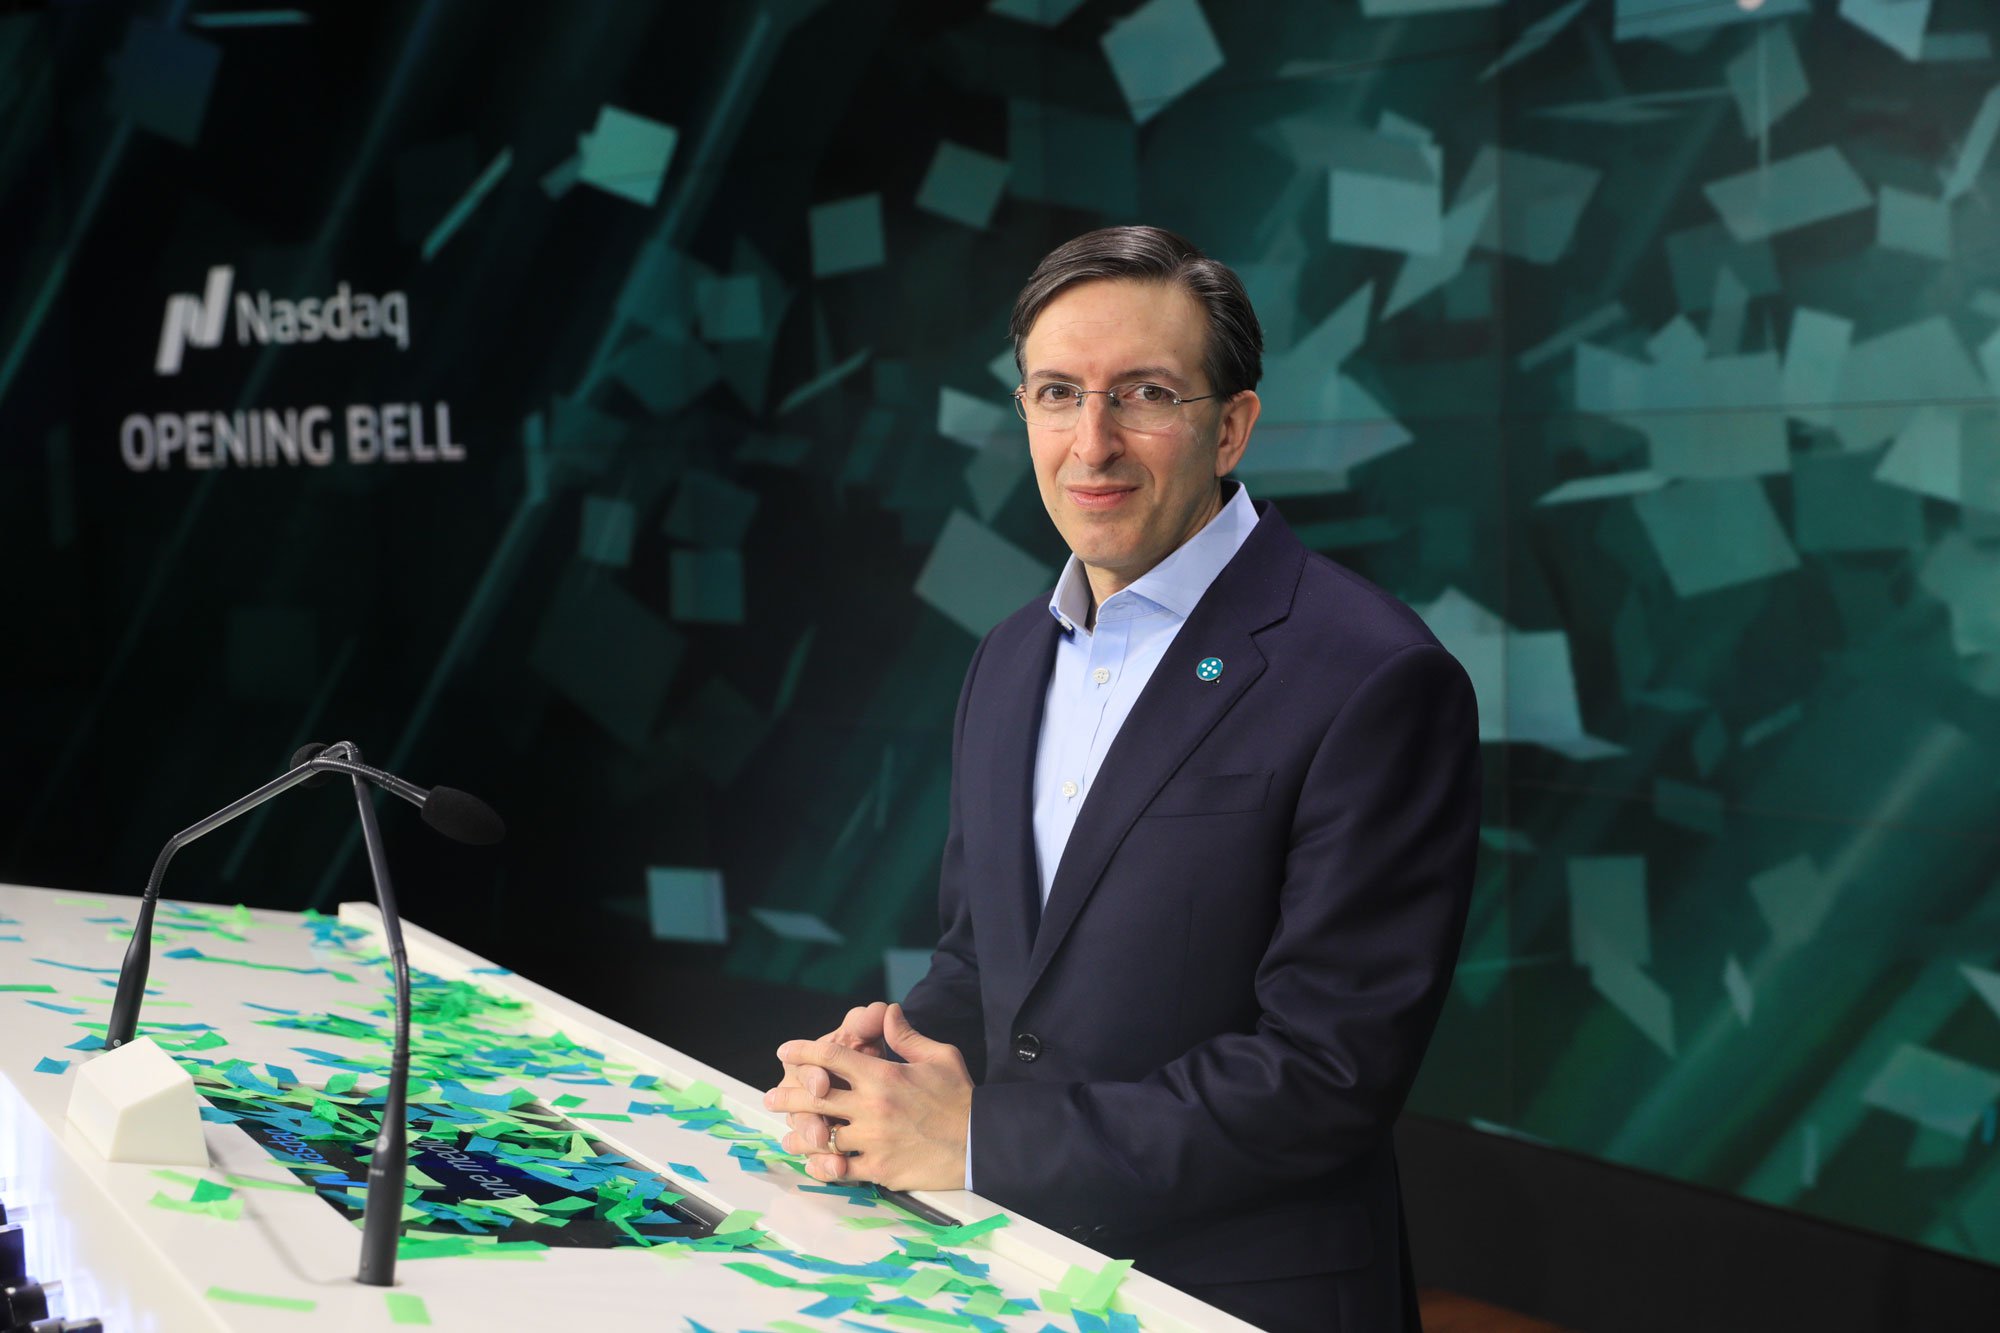 Photo of Amir Dan Rubin, CEO of One Medical, at Nasdaq opening bell IPO ceremony